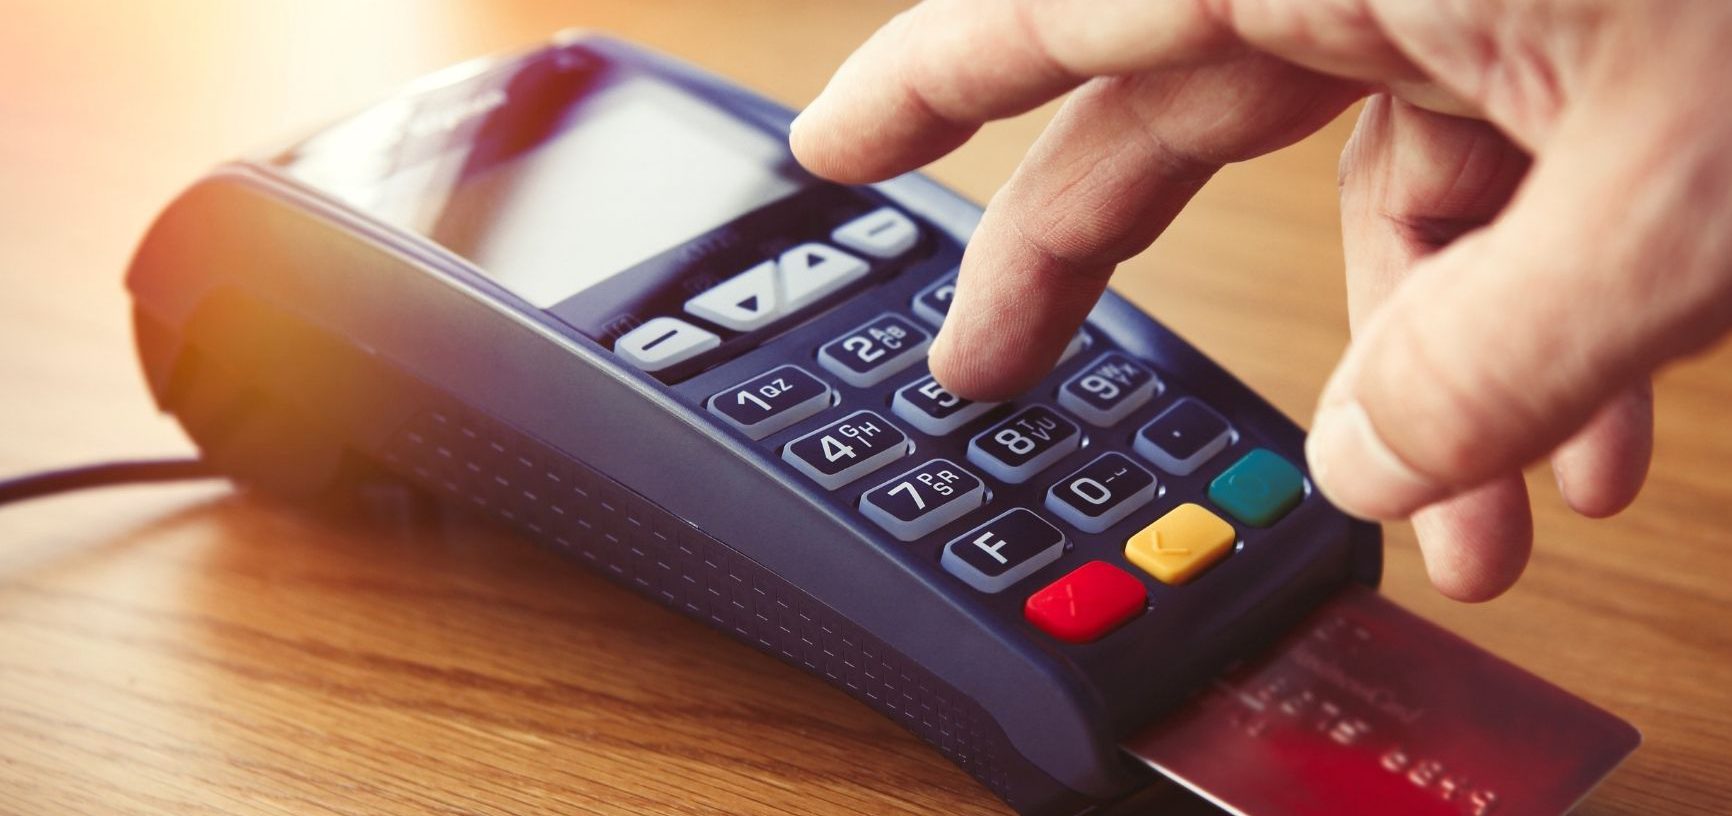 Global Cards & Payments Market Outlook, Opportunities And Strategies